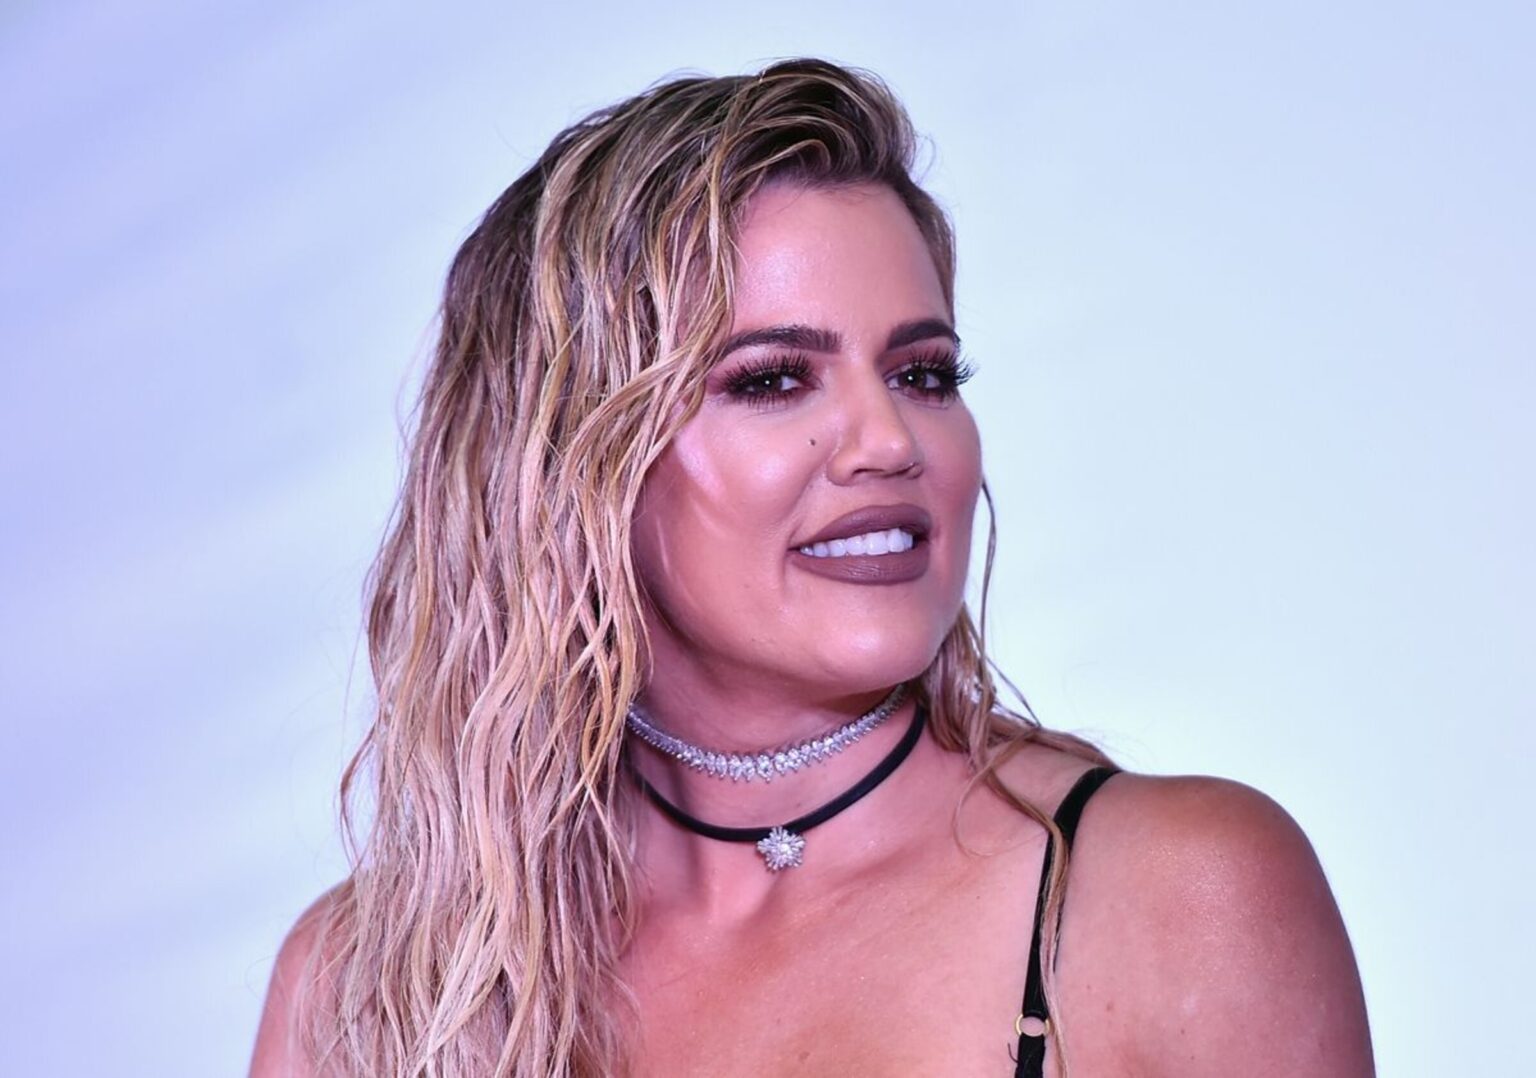 Are UFOs real? Khloe Kardashian thinks so! Rocket to the height of unexpected news and learn about Kardashian's UFO sighting.